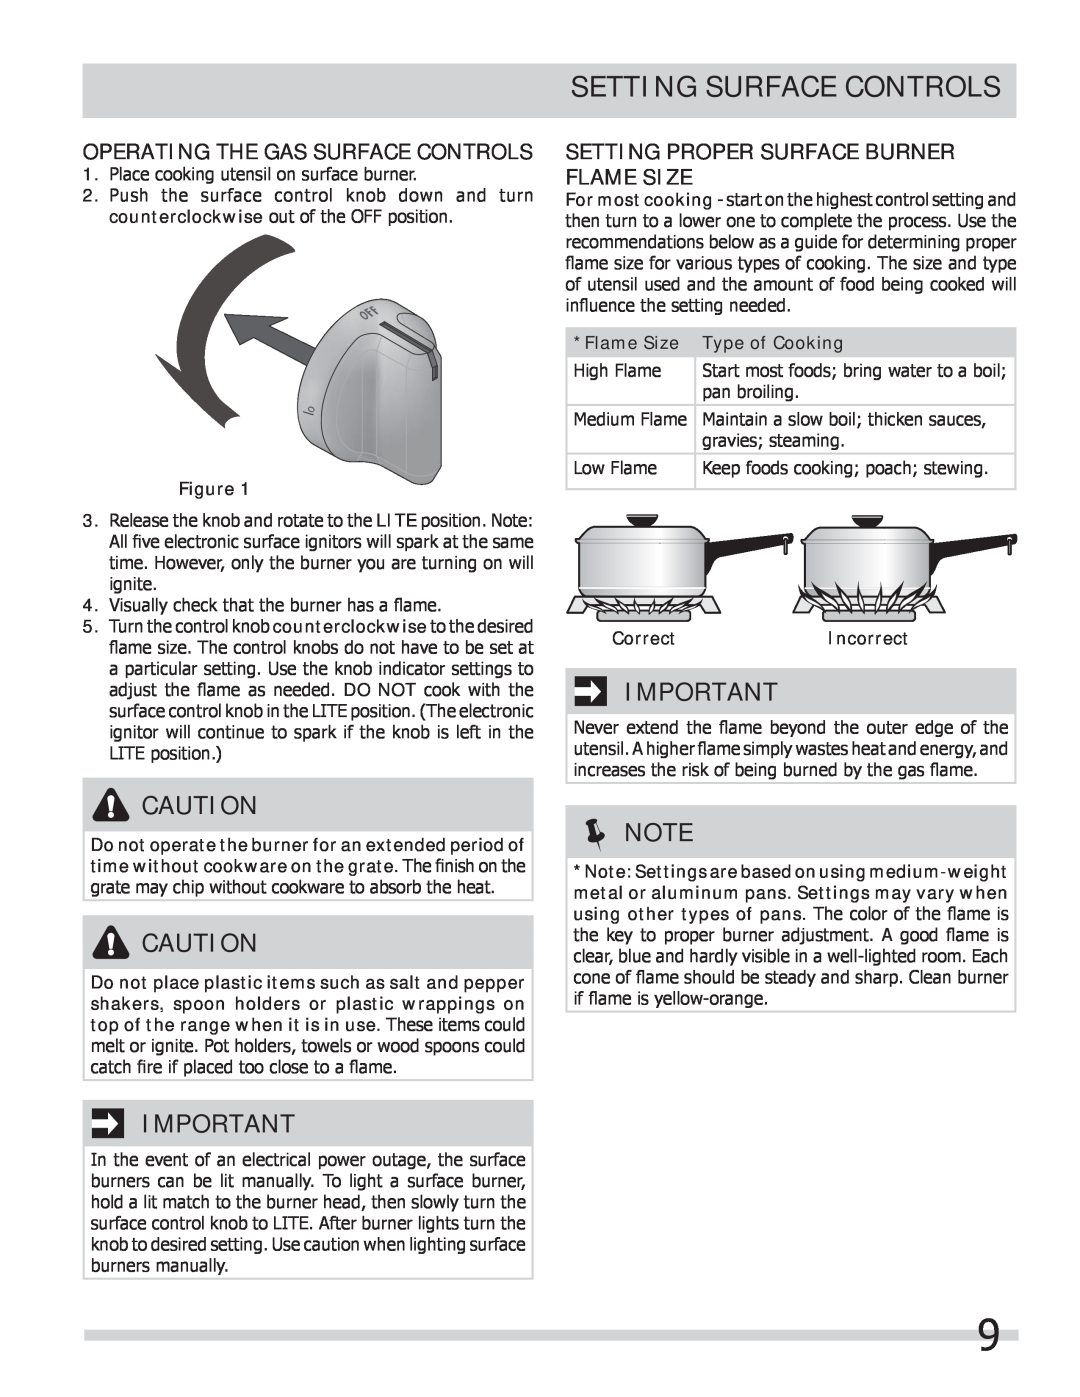 Frigidaire 318205258 important safety instructions Setting Surface Controls, Operating The Gas Surface Controls 